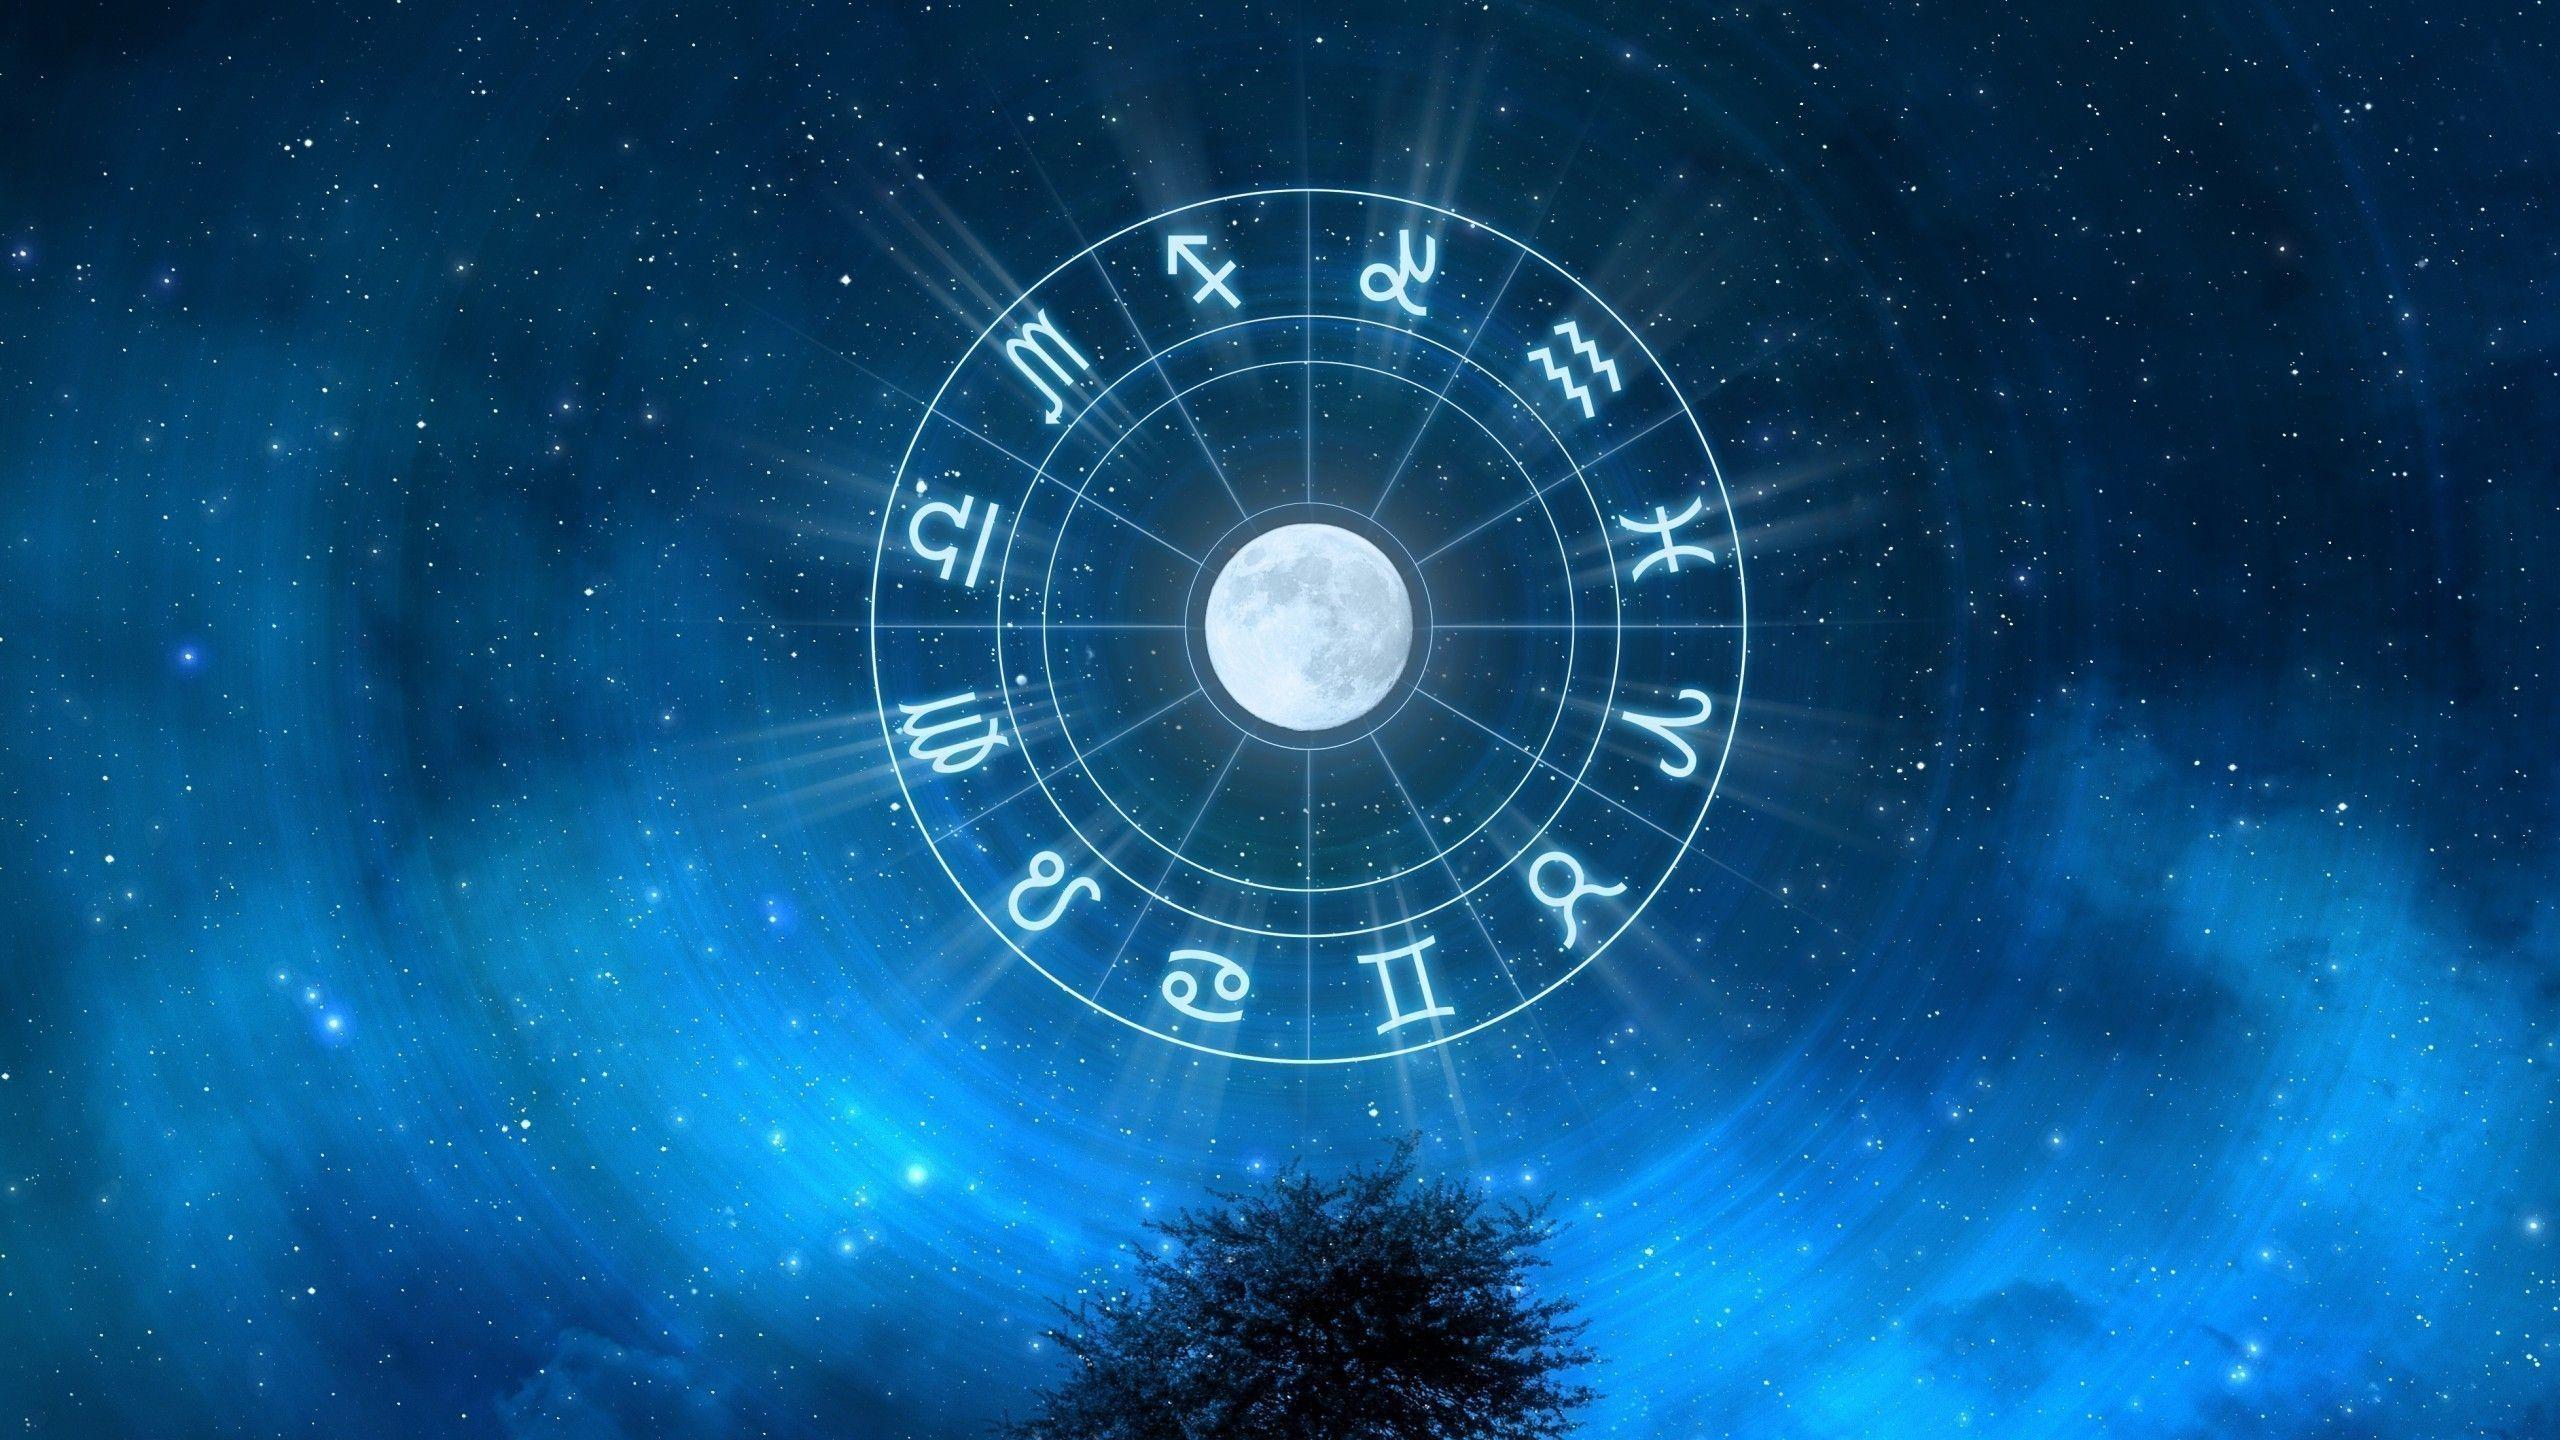 40 Artistic Zodiac HD Wallpapers and Backgrounds